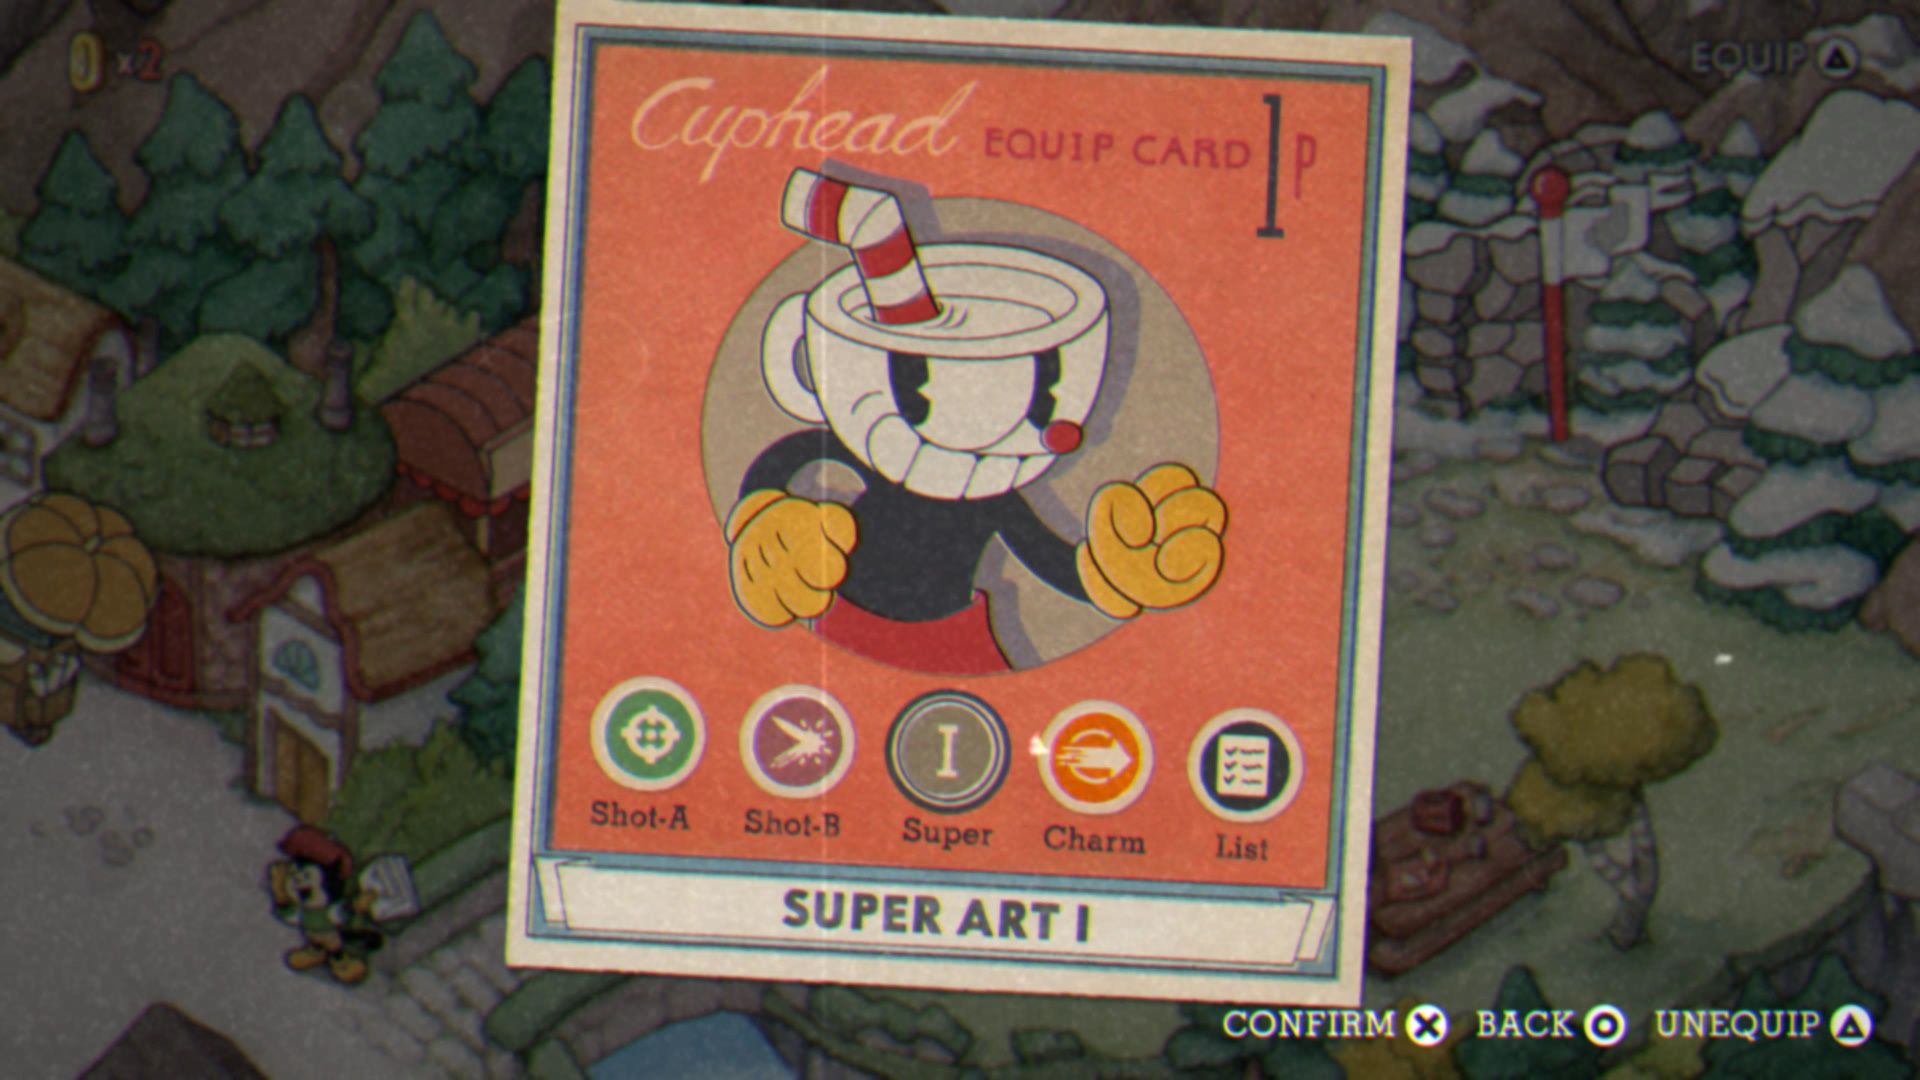 How to get past the Graveyard Puzzle in Cuphead: The Delicious Last Course